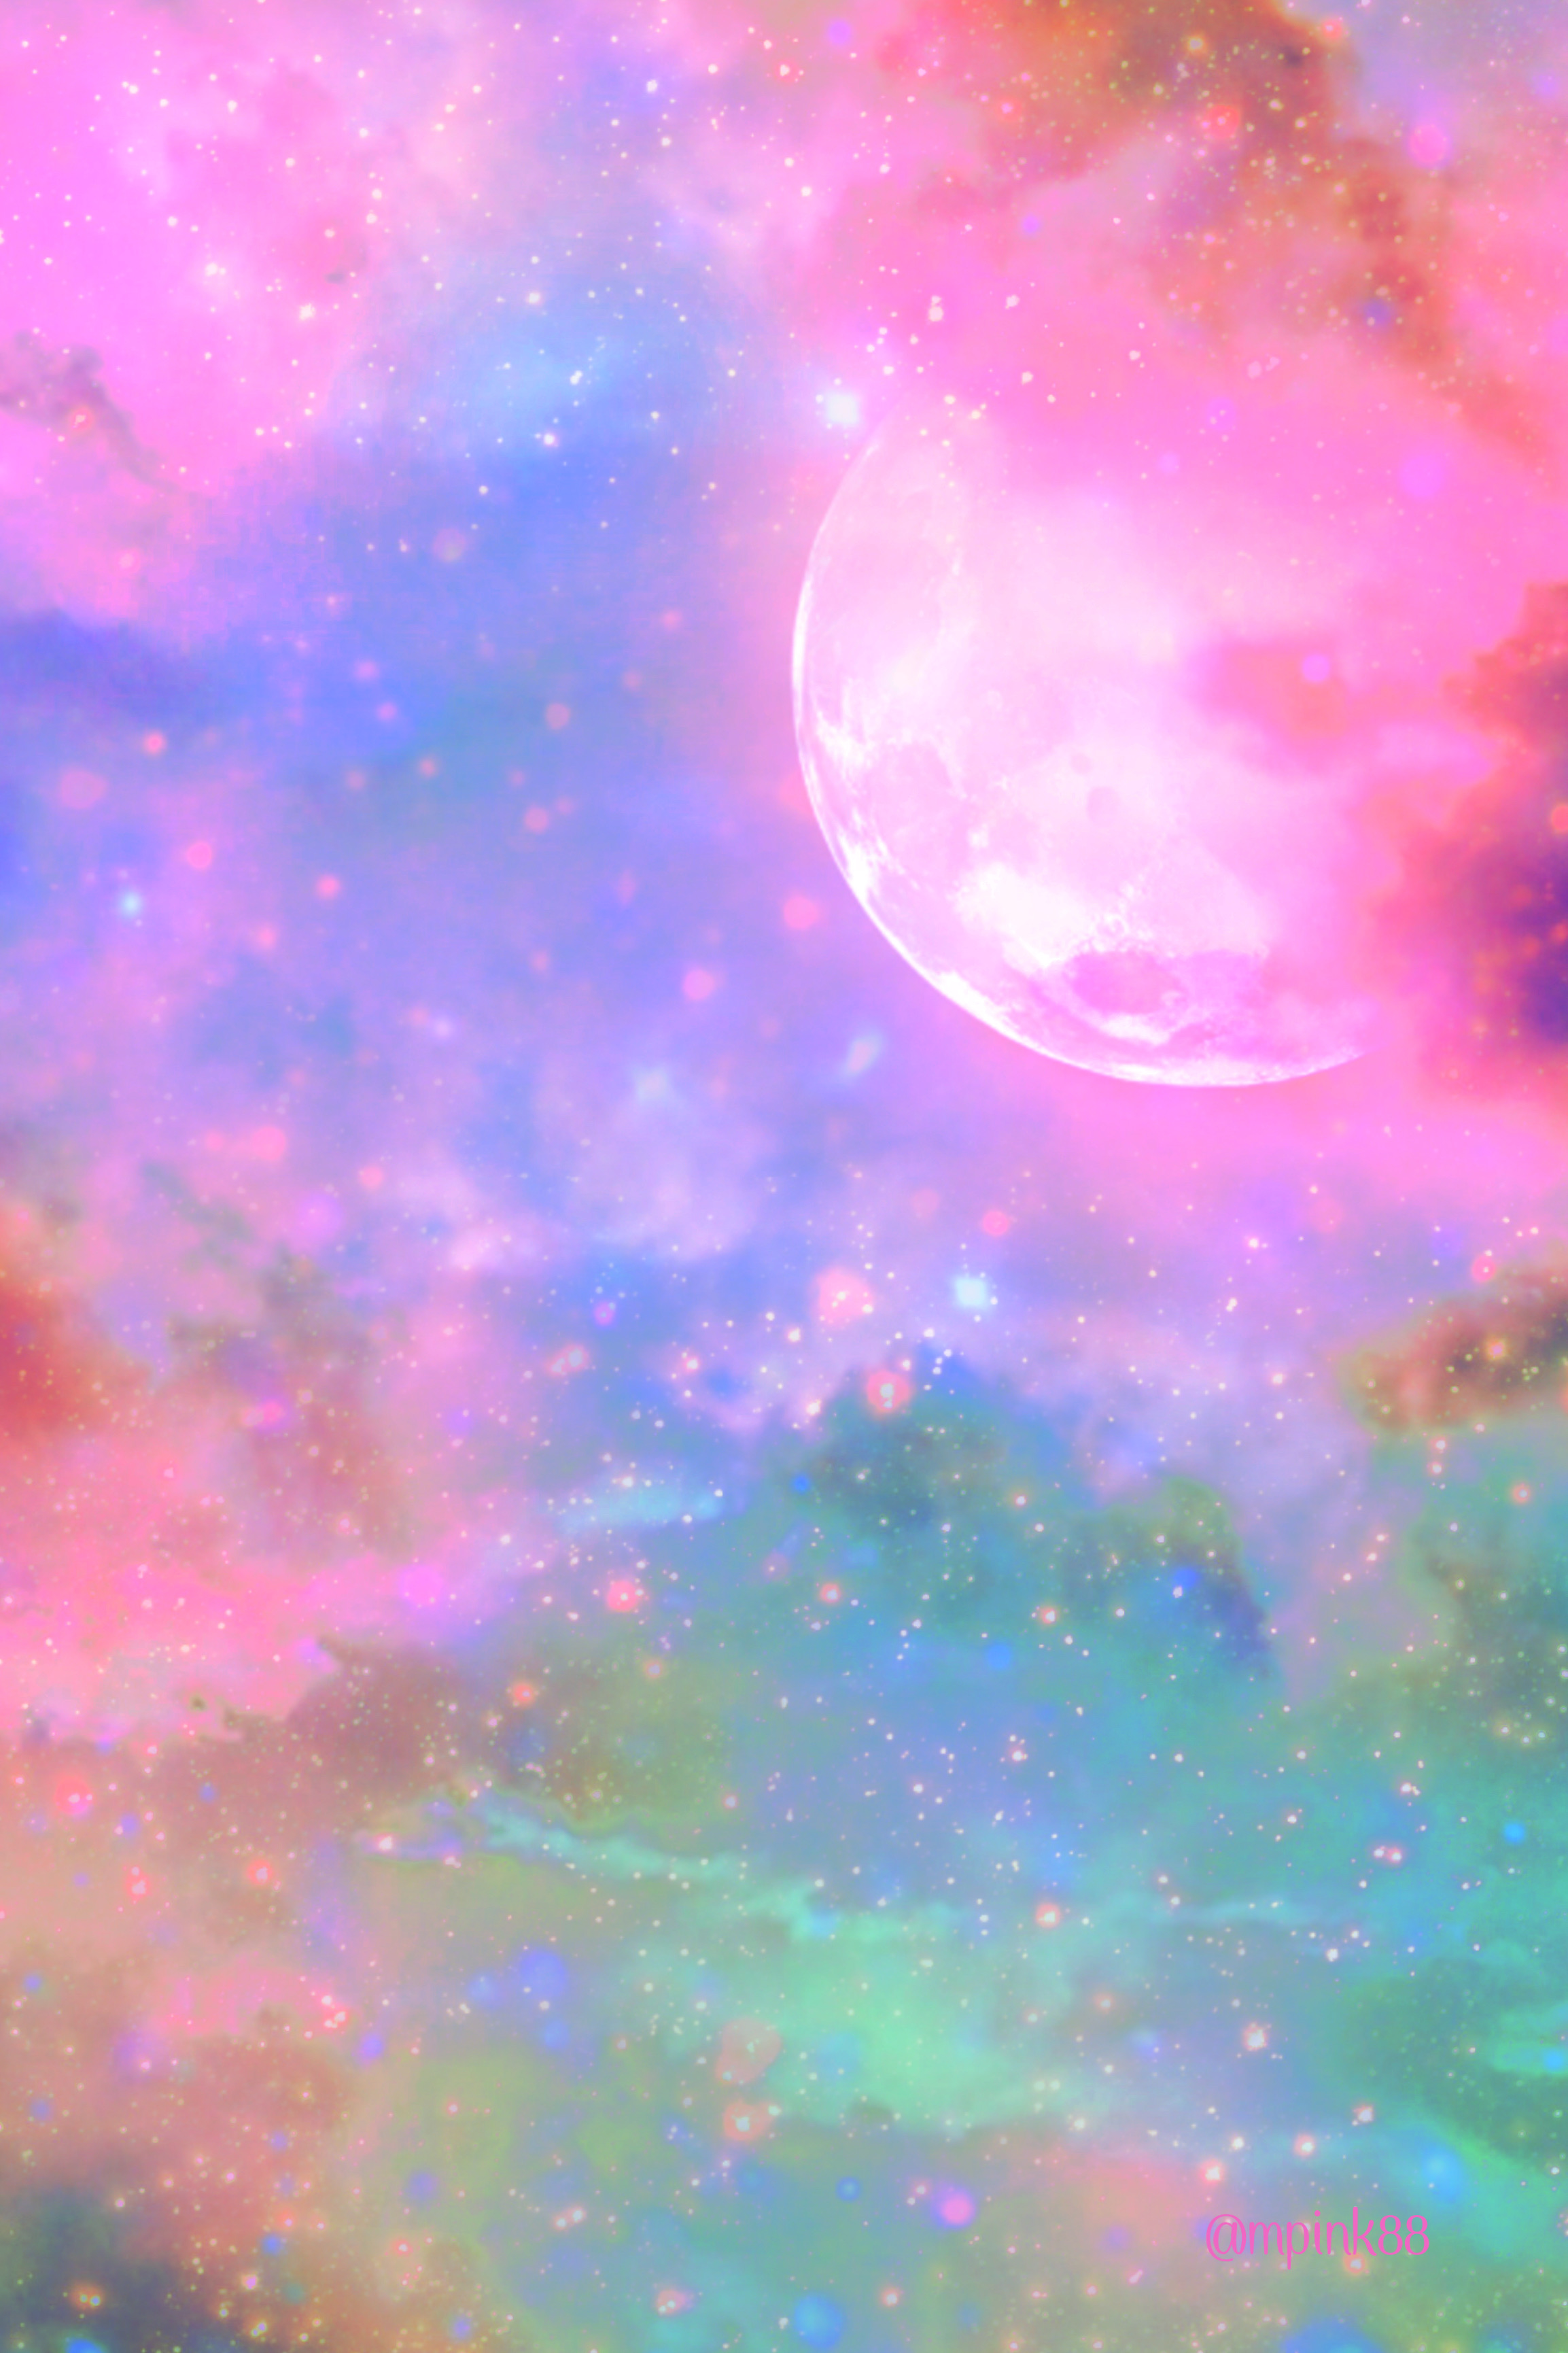 freetoedit glitter sparkle galaxy sky image by @misspink88